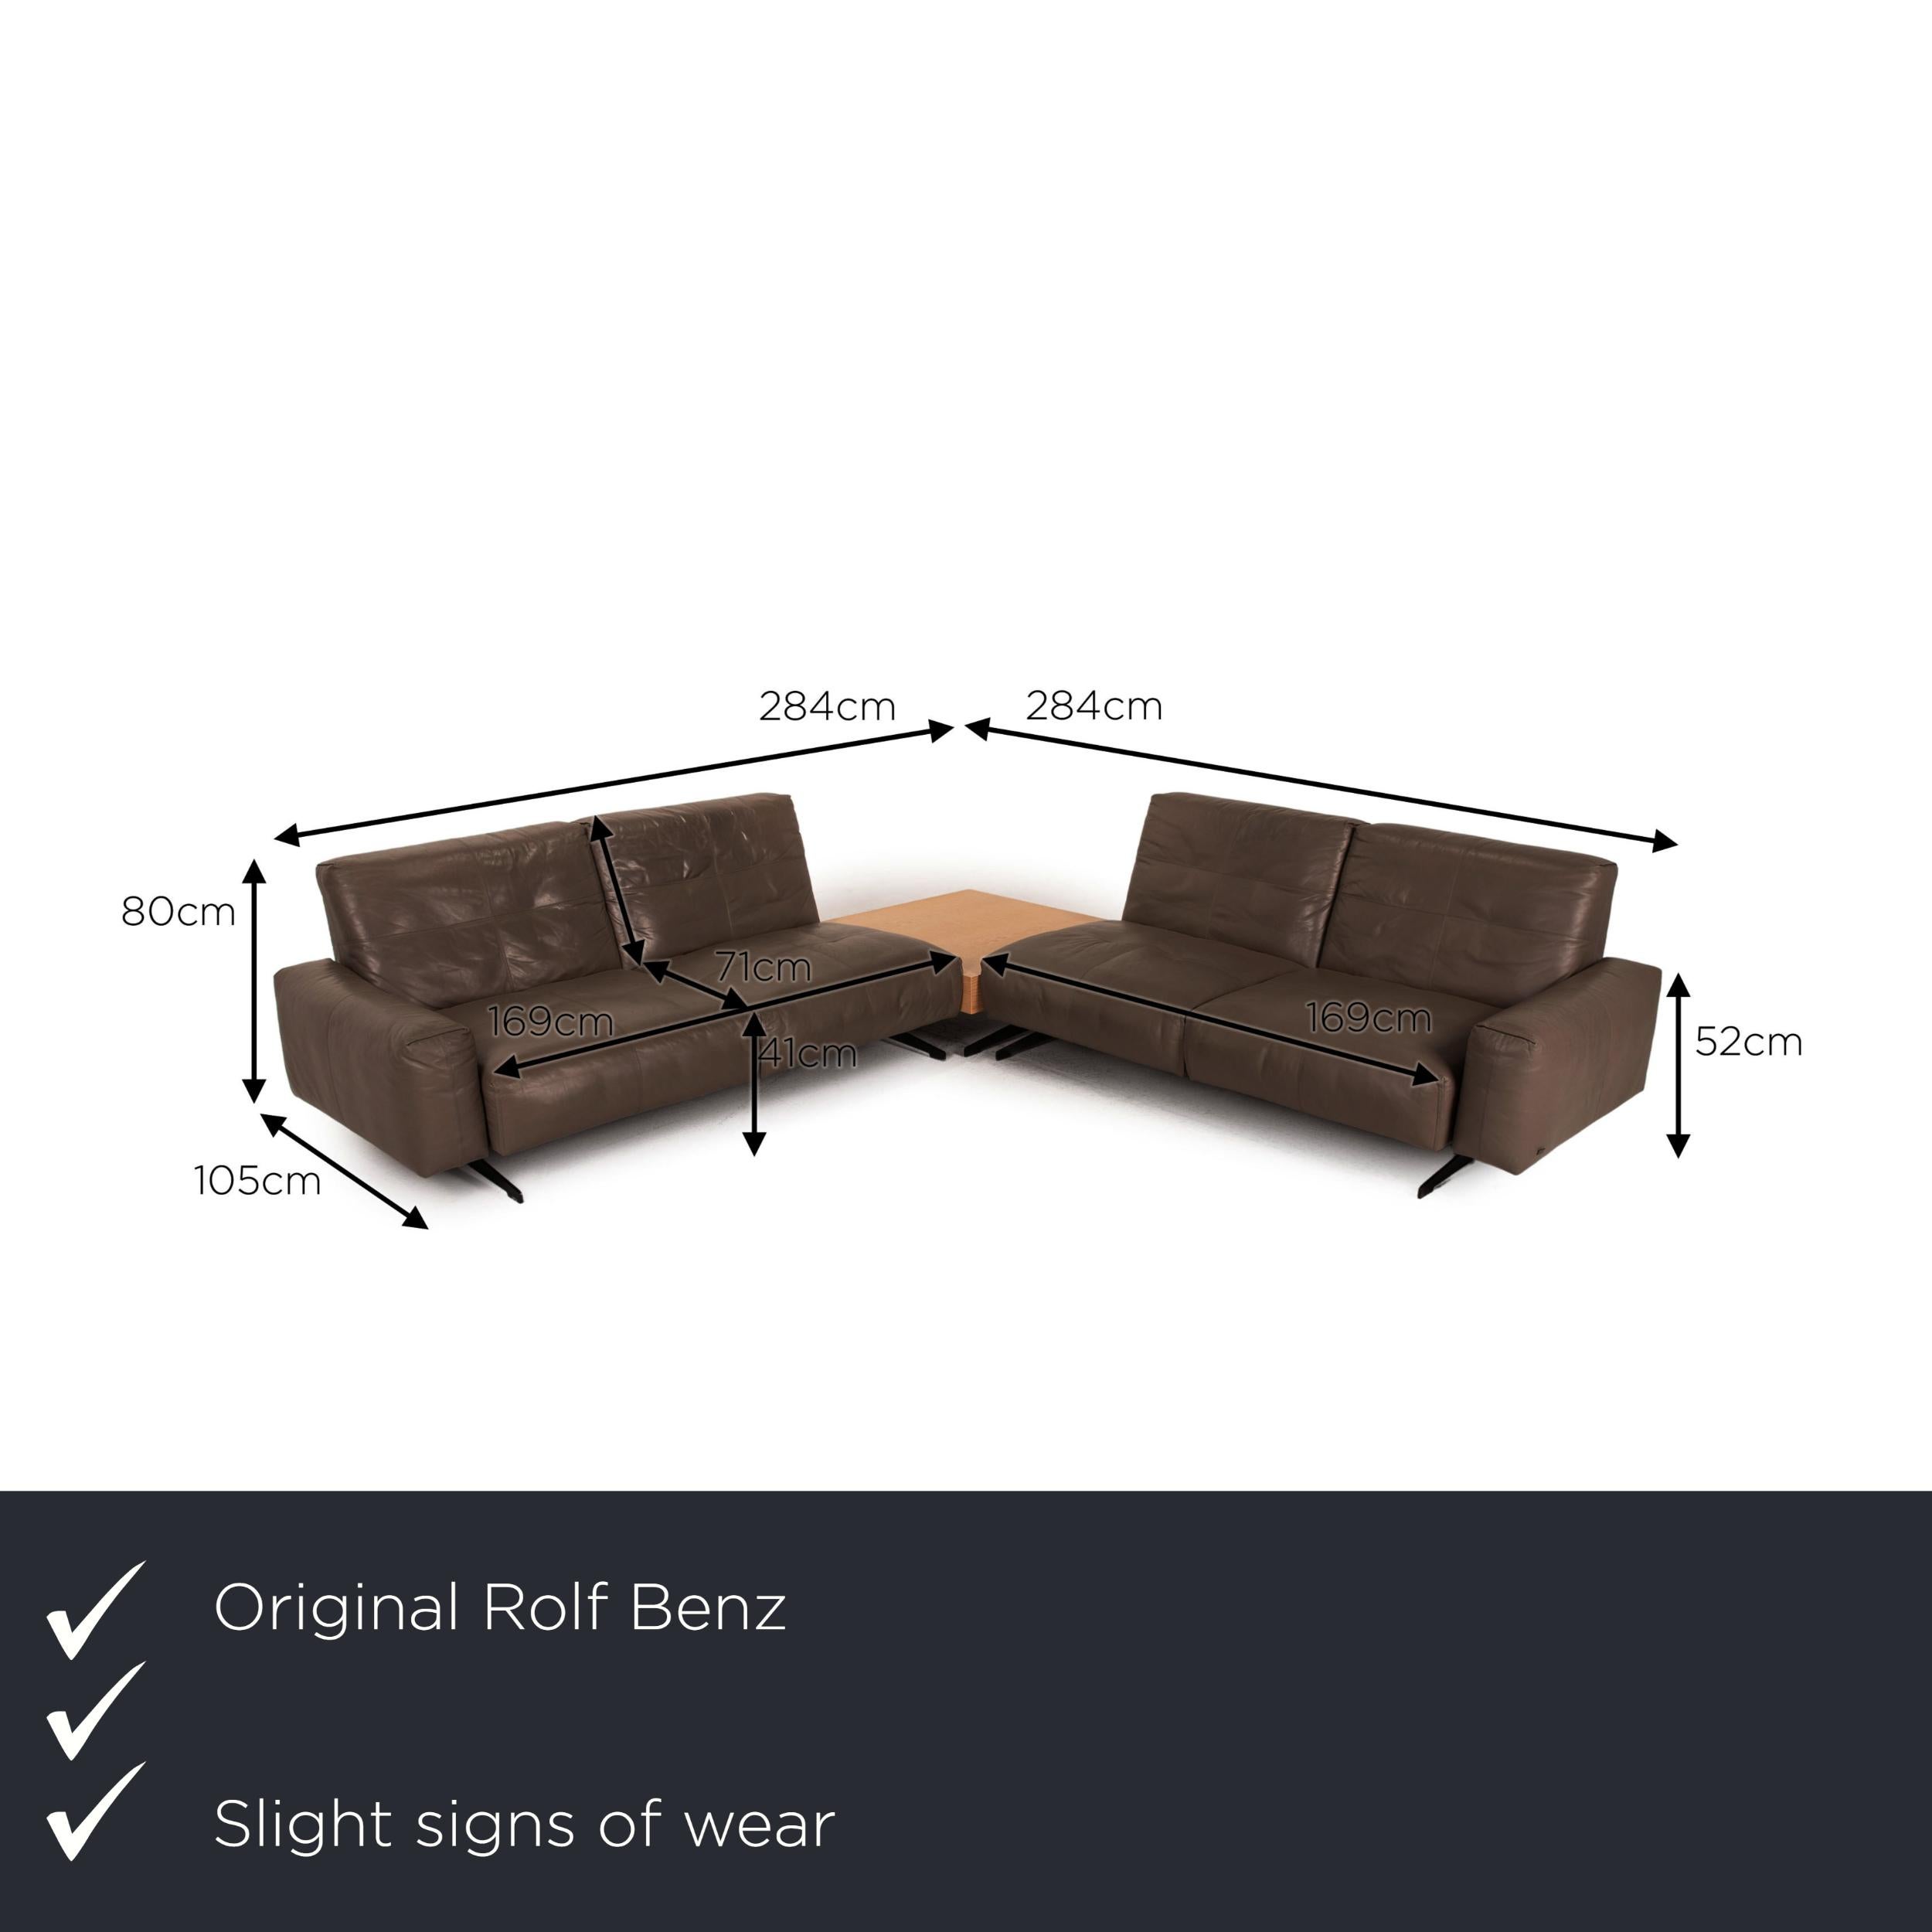 We present to you a Rolf Benz 50 leather sofa brown corner sofa couch.


 Product measurements in centimeters:
 

Depth: 105
Width: 284
Height: 80
Seat height: 41
Rest height: 52
Seat depth: 71
Seat width: 169
Back height: 41.
 